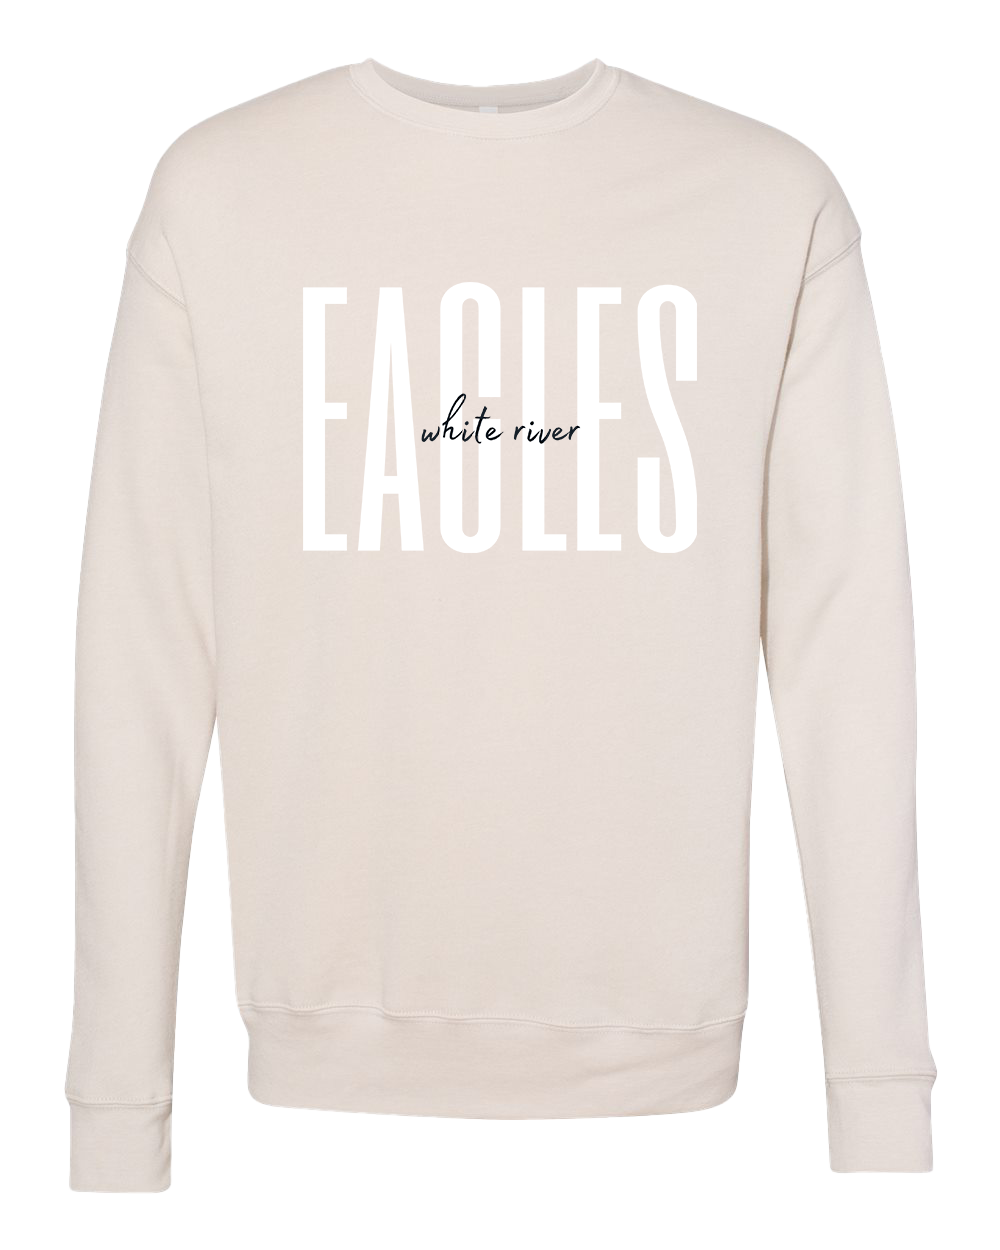 White River Eagles Tall Font Crew - Various Colors